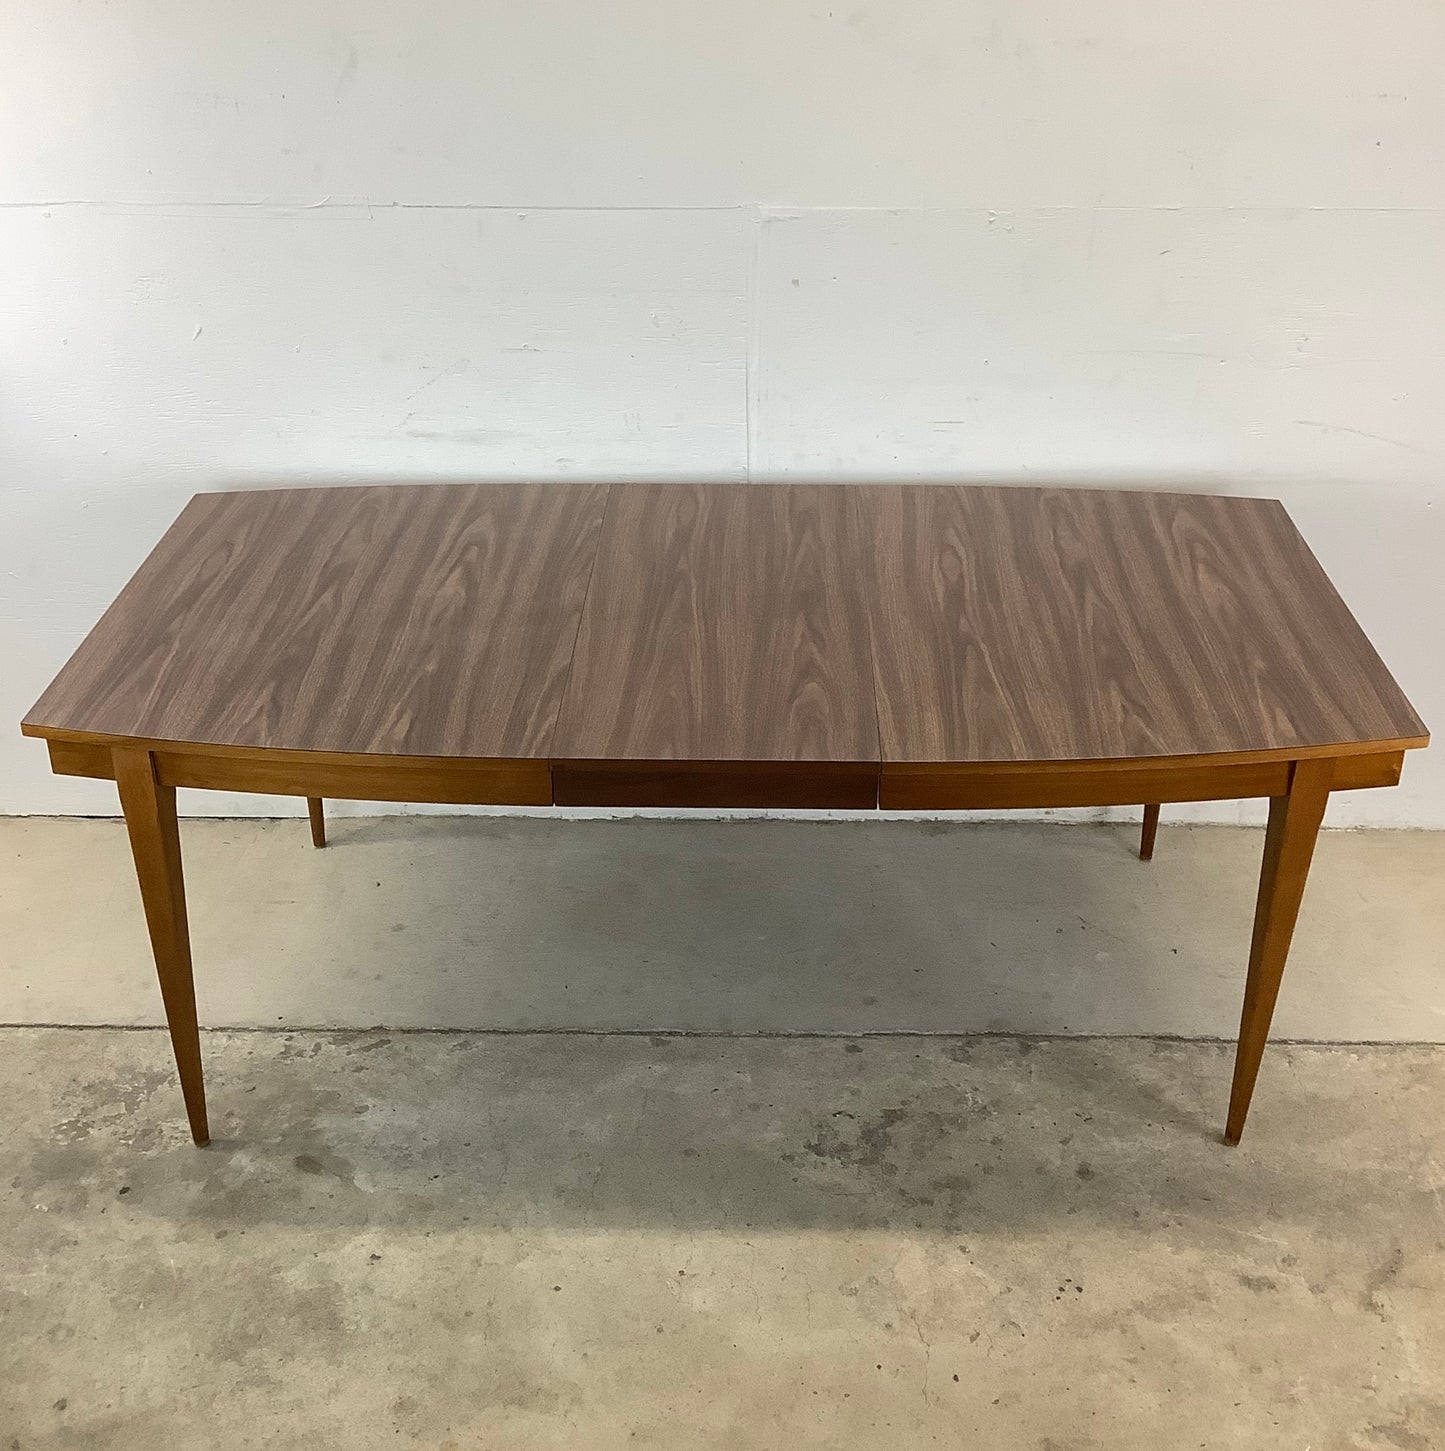 Mid-Century Dining Table With Leaf